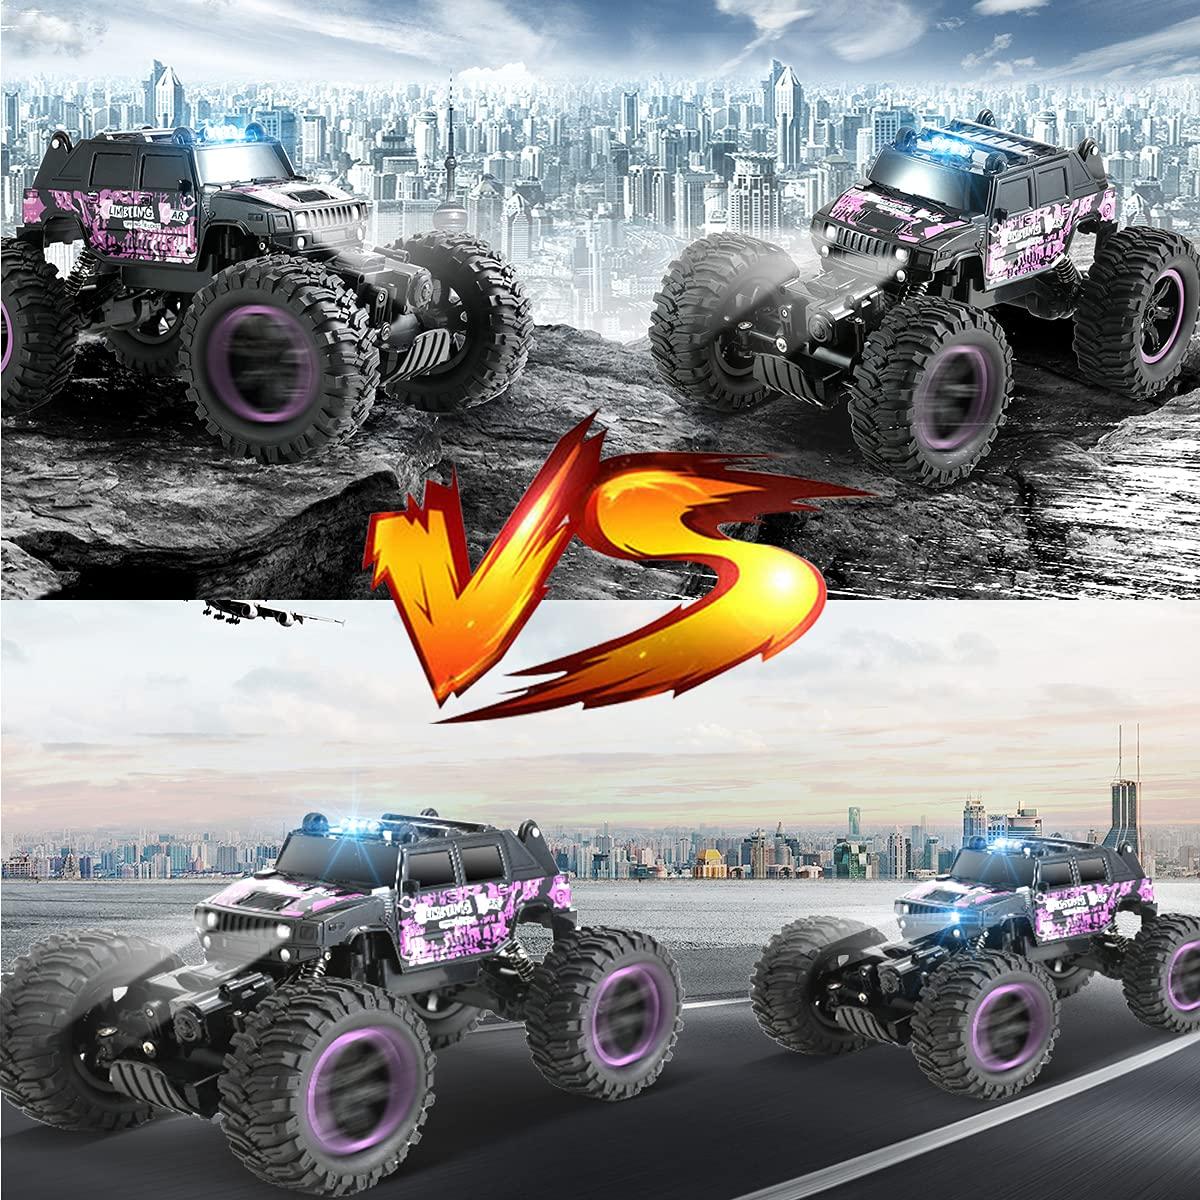 Purple Rc Car: Various Designs for Purple RC Cars: From Speedy Sports Cars to Off-Roading Trucks